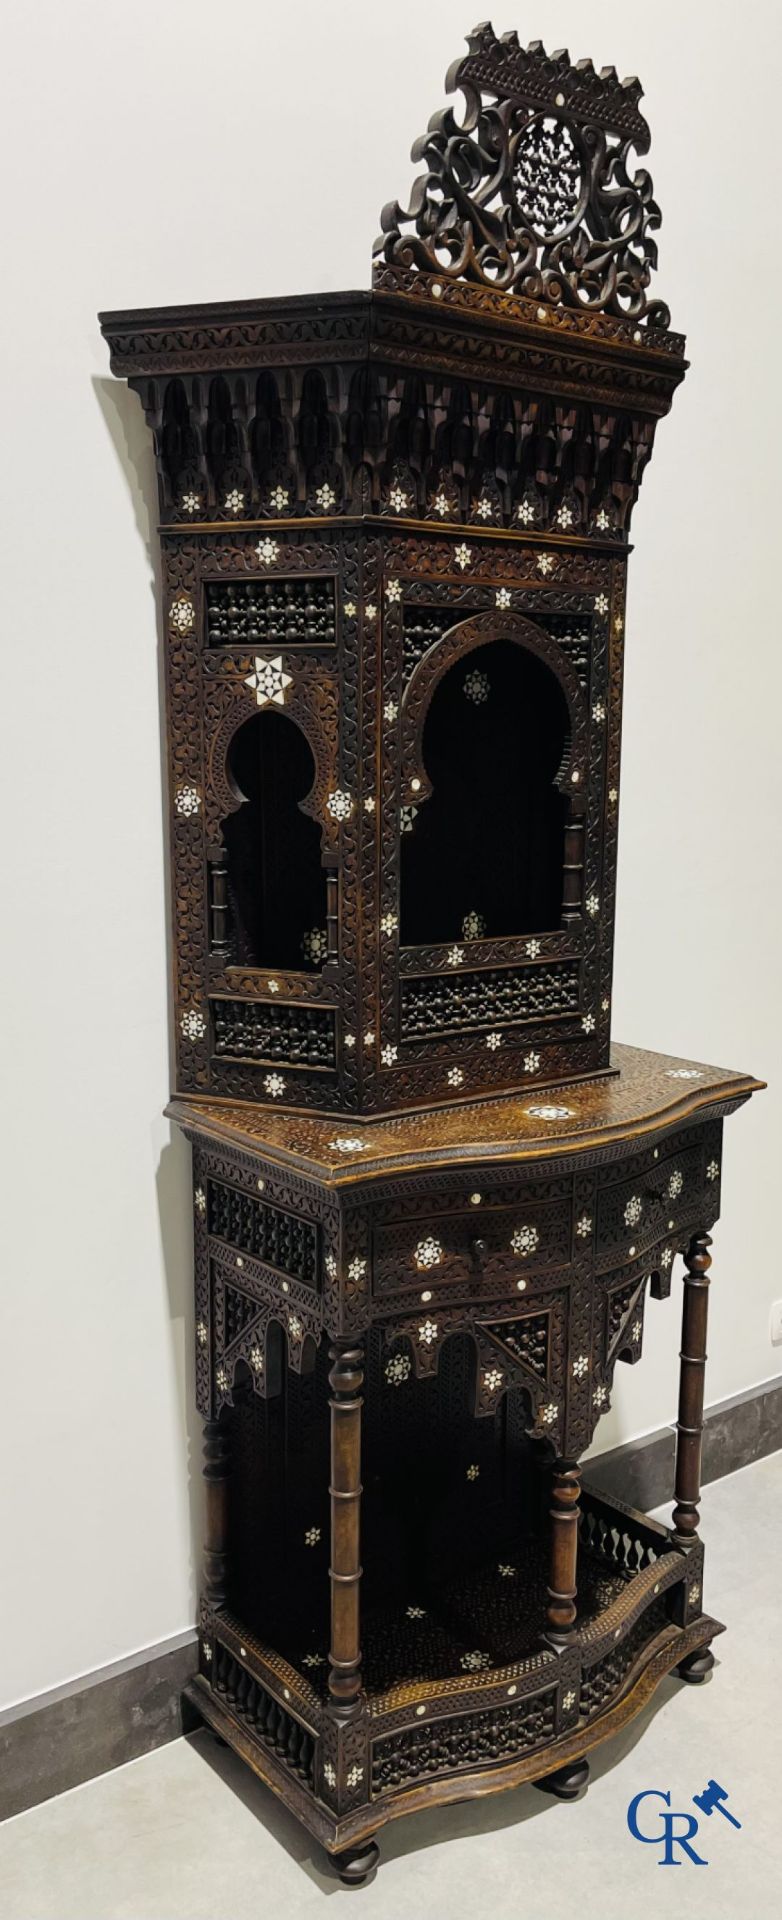 Sculpted furniture with inlays of ebony and mother-of-pearl. Syria, early 19th century. - Image 8 of 22